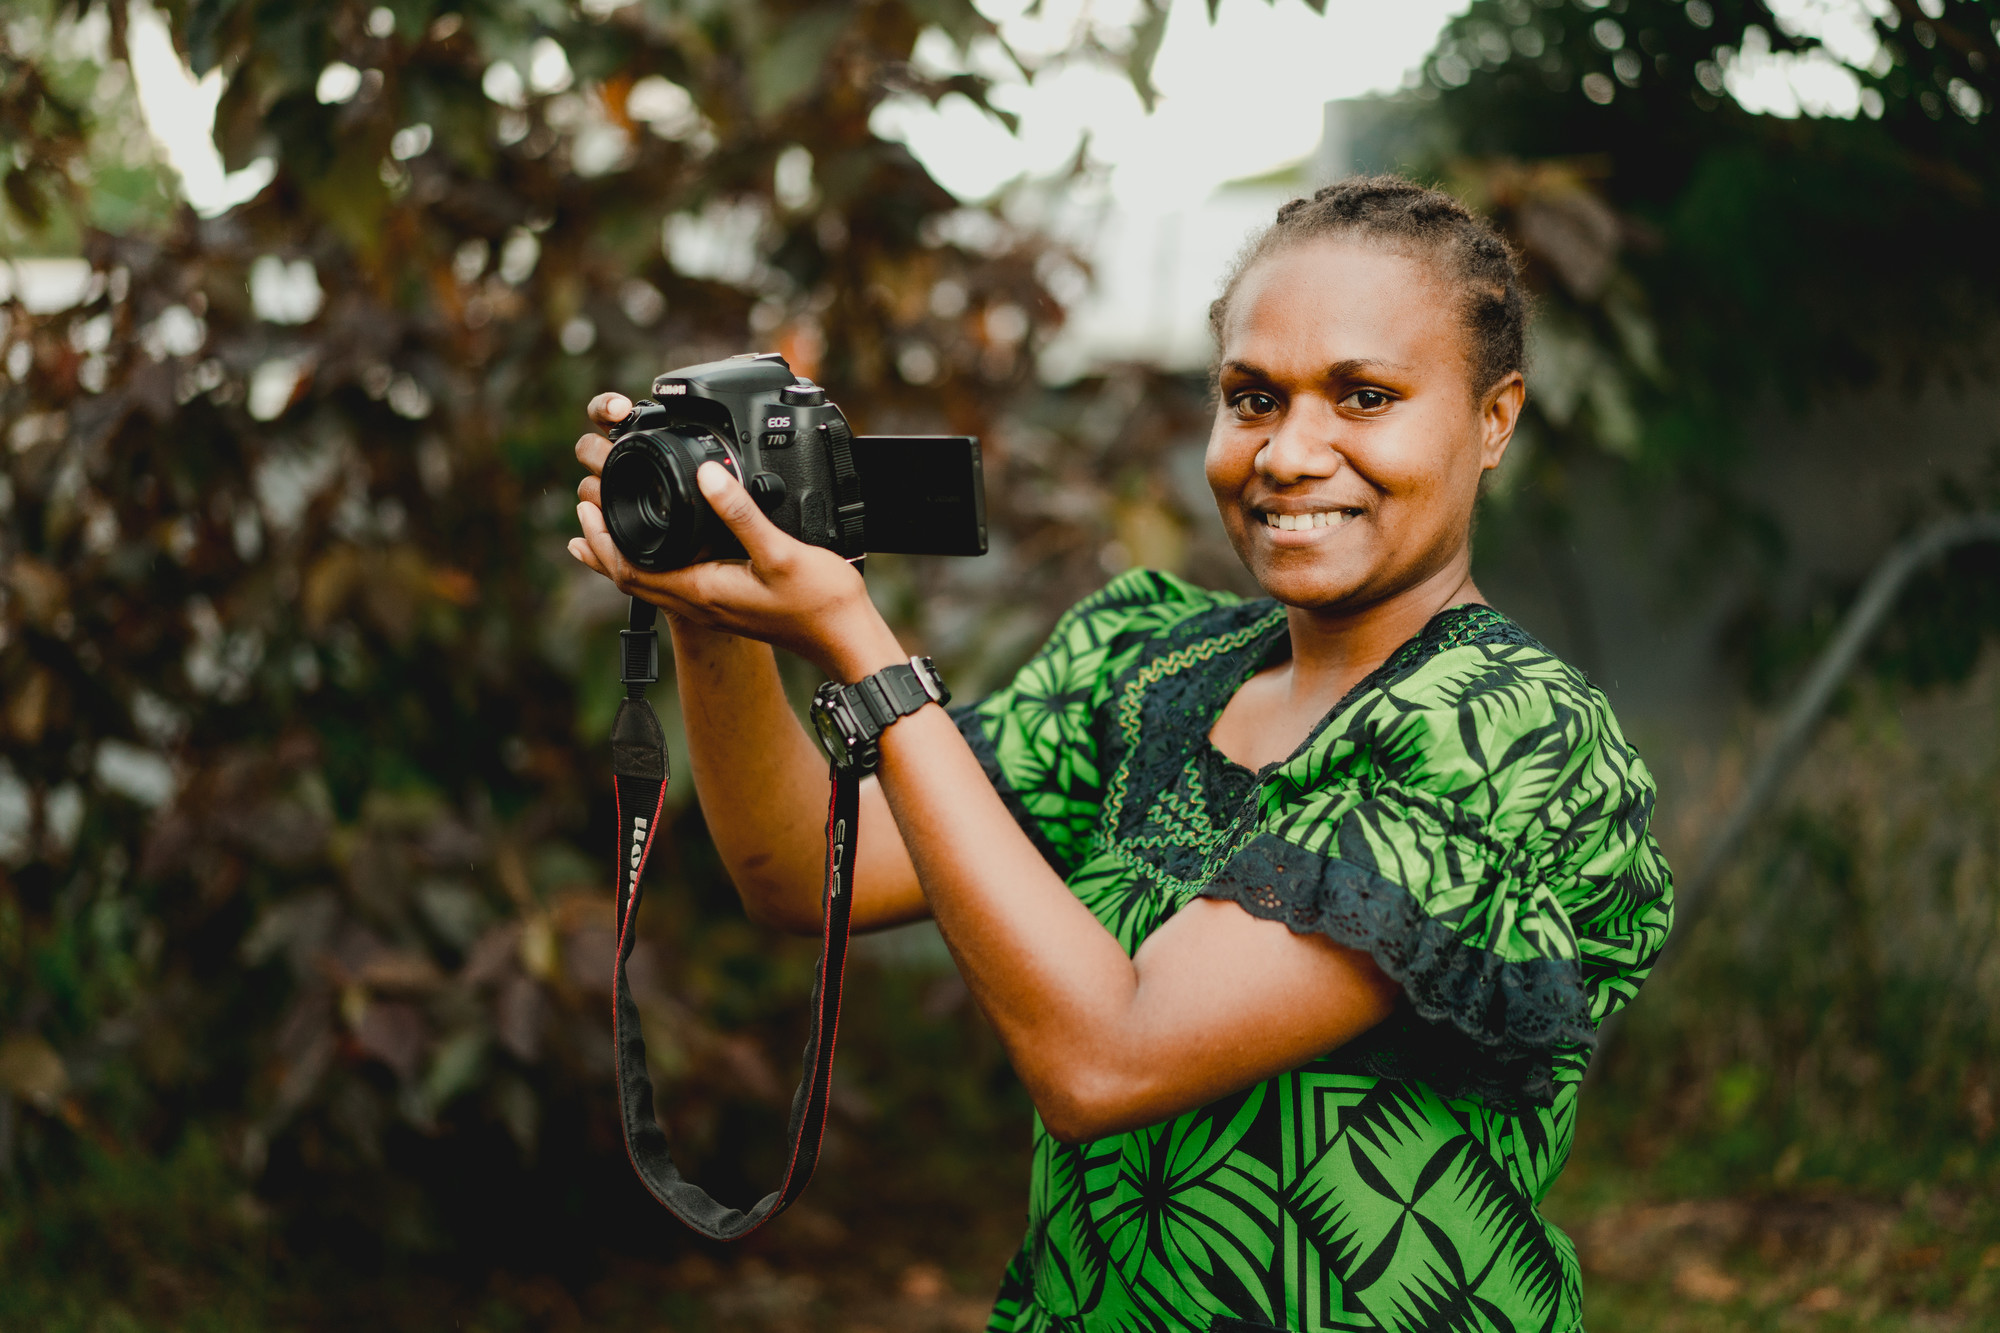 Ann-Ruth has worked with Further Arts, a Vanuatu-based charitable association furthering Vanuatu music, media, dance, and culture. She is currently running her own small business in painting and sewing.